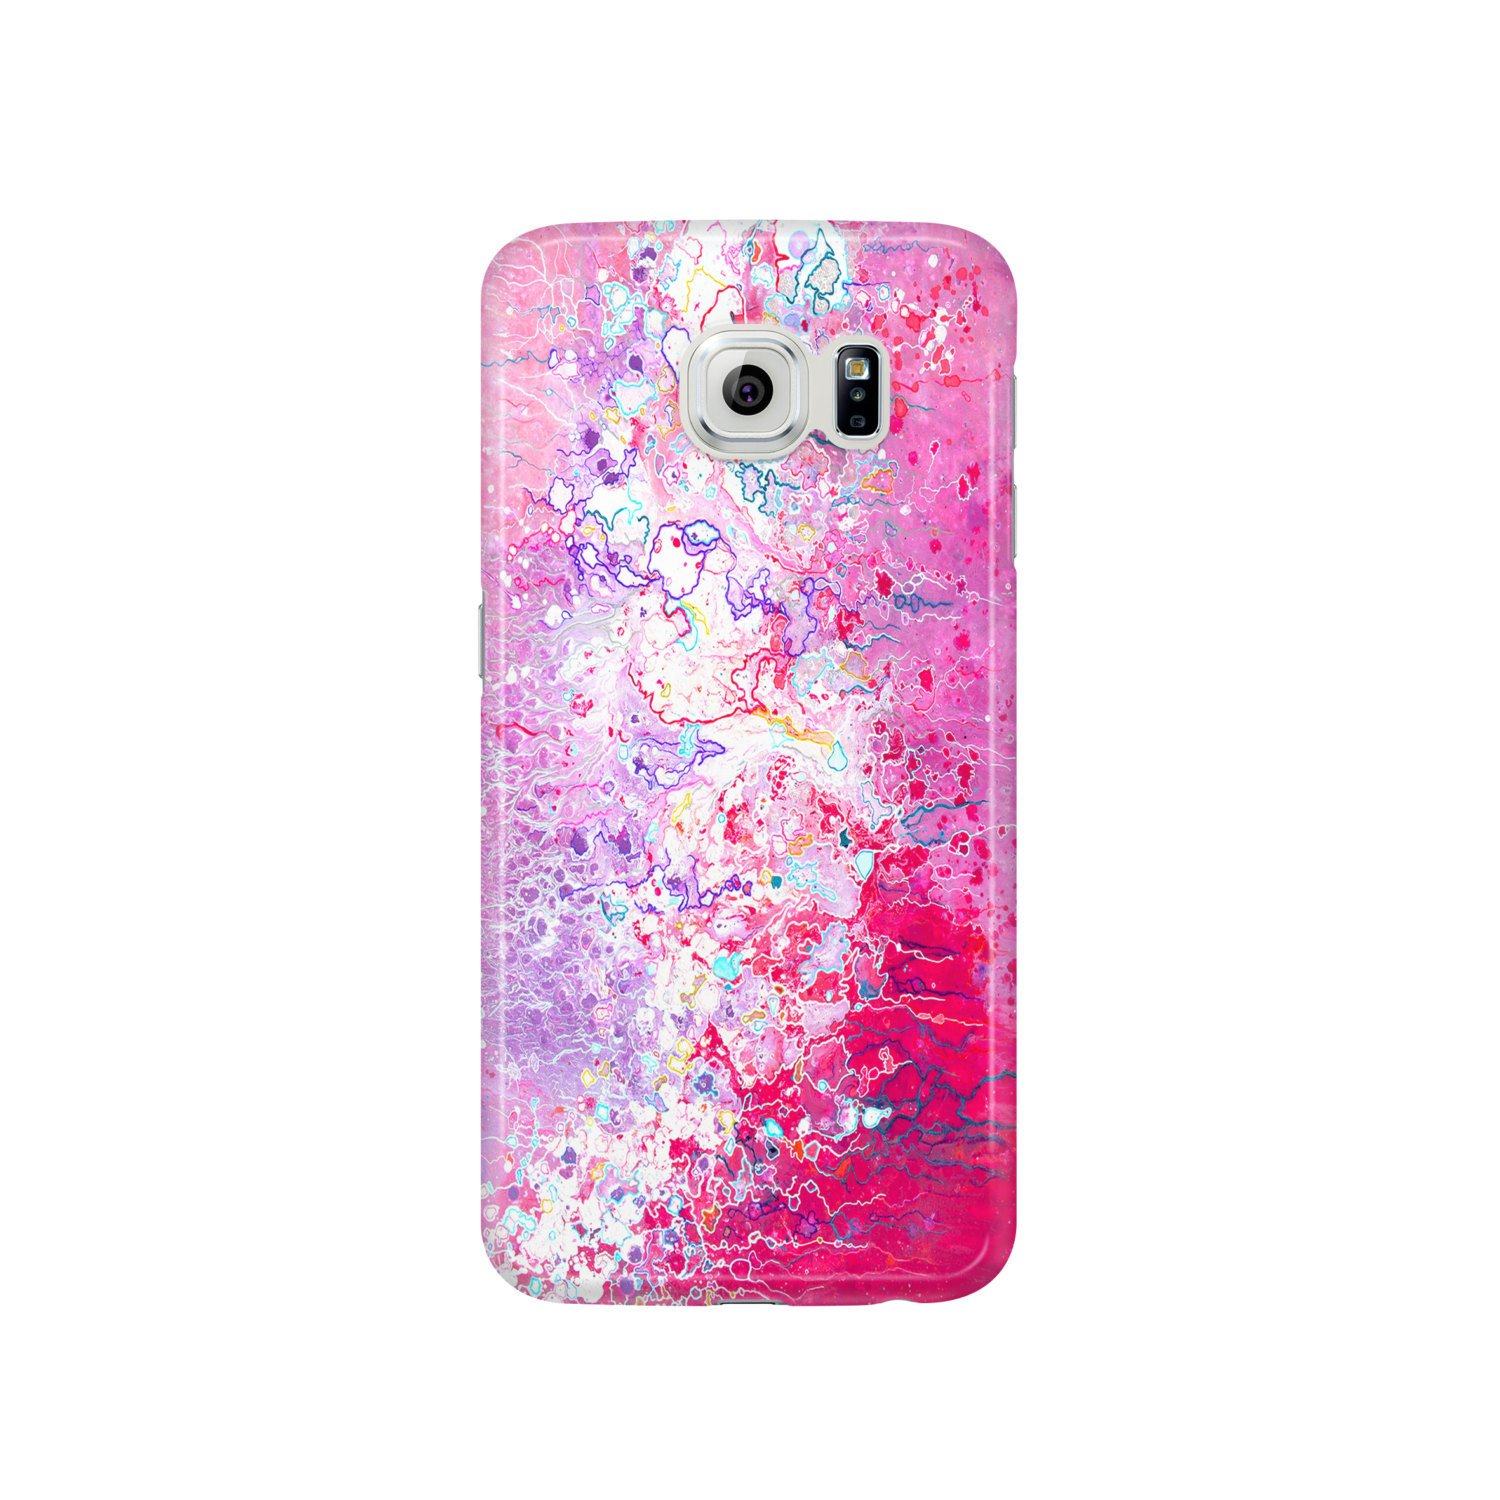 Falling Through Clouds Samsung Case - Louise Mead